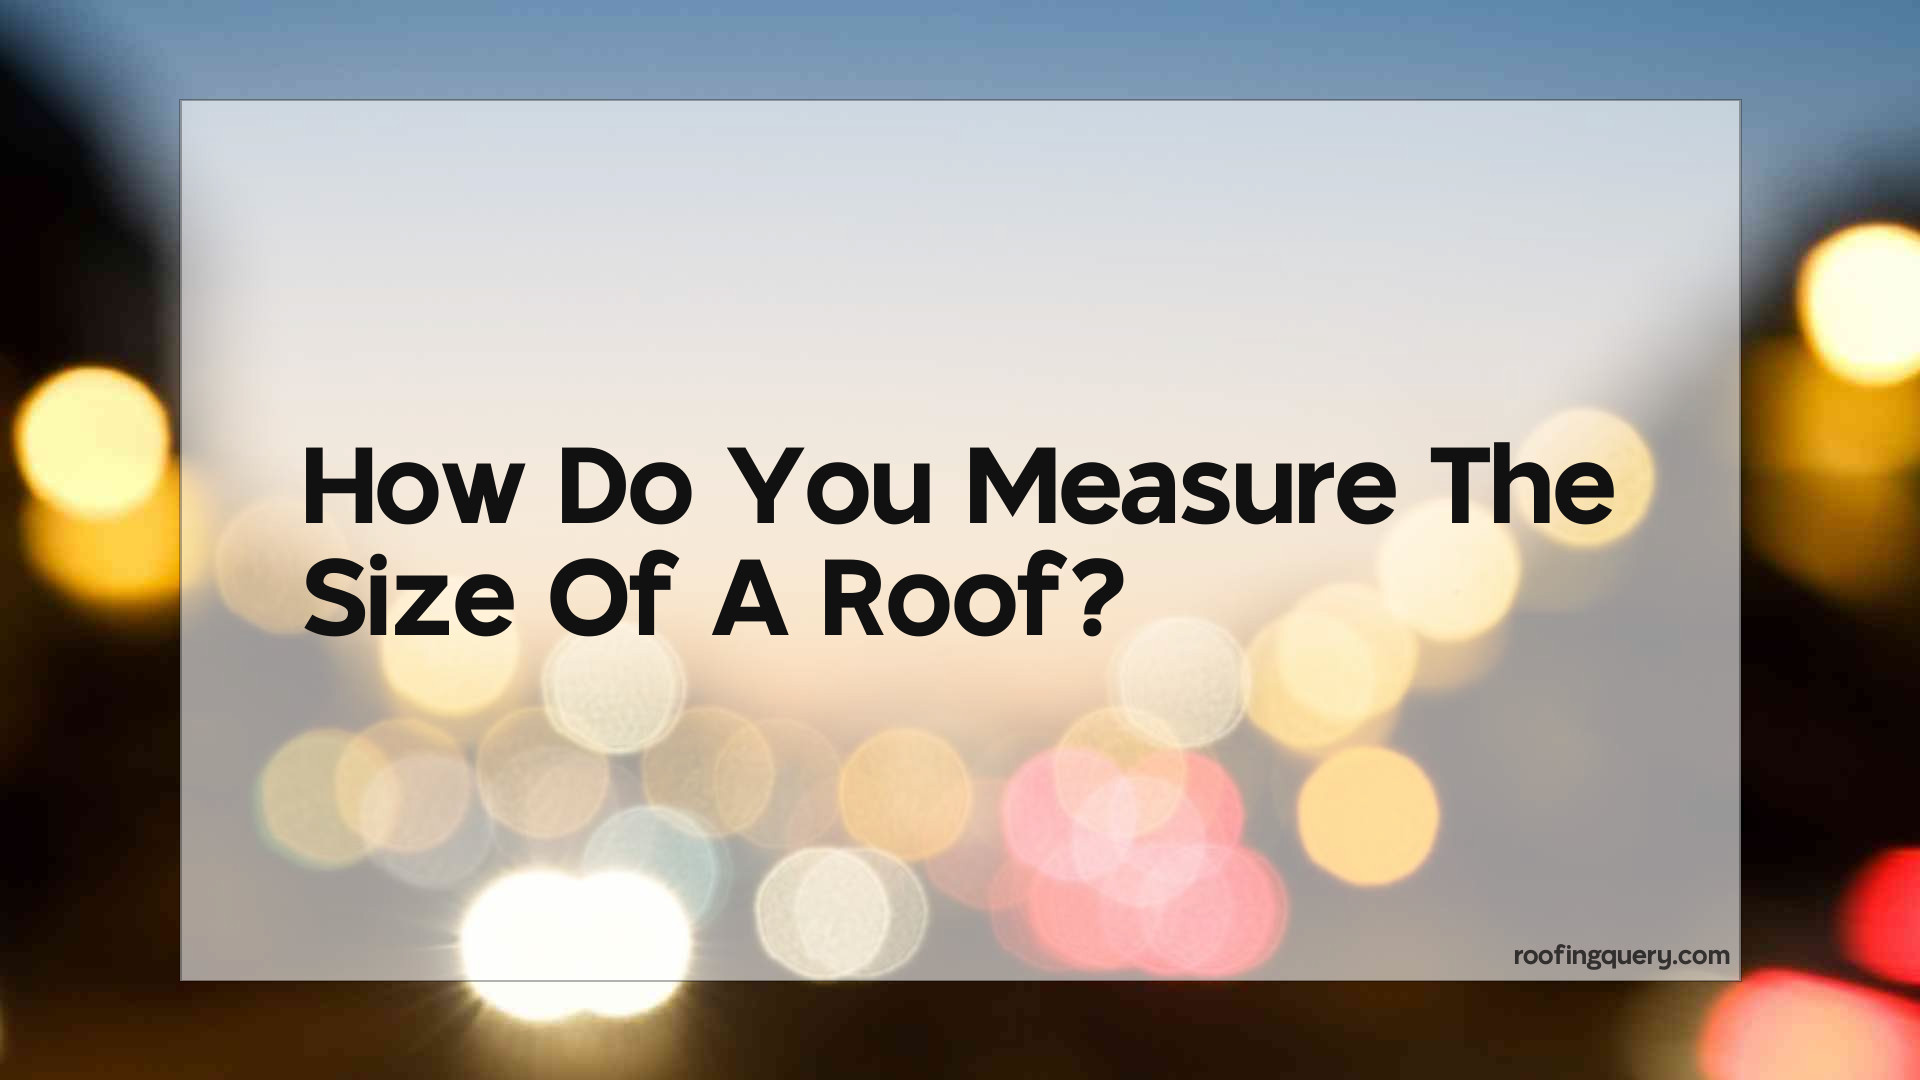 How Do You Measure The Size Of A Roof